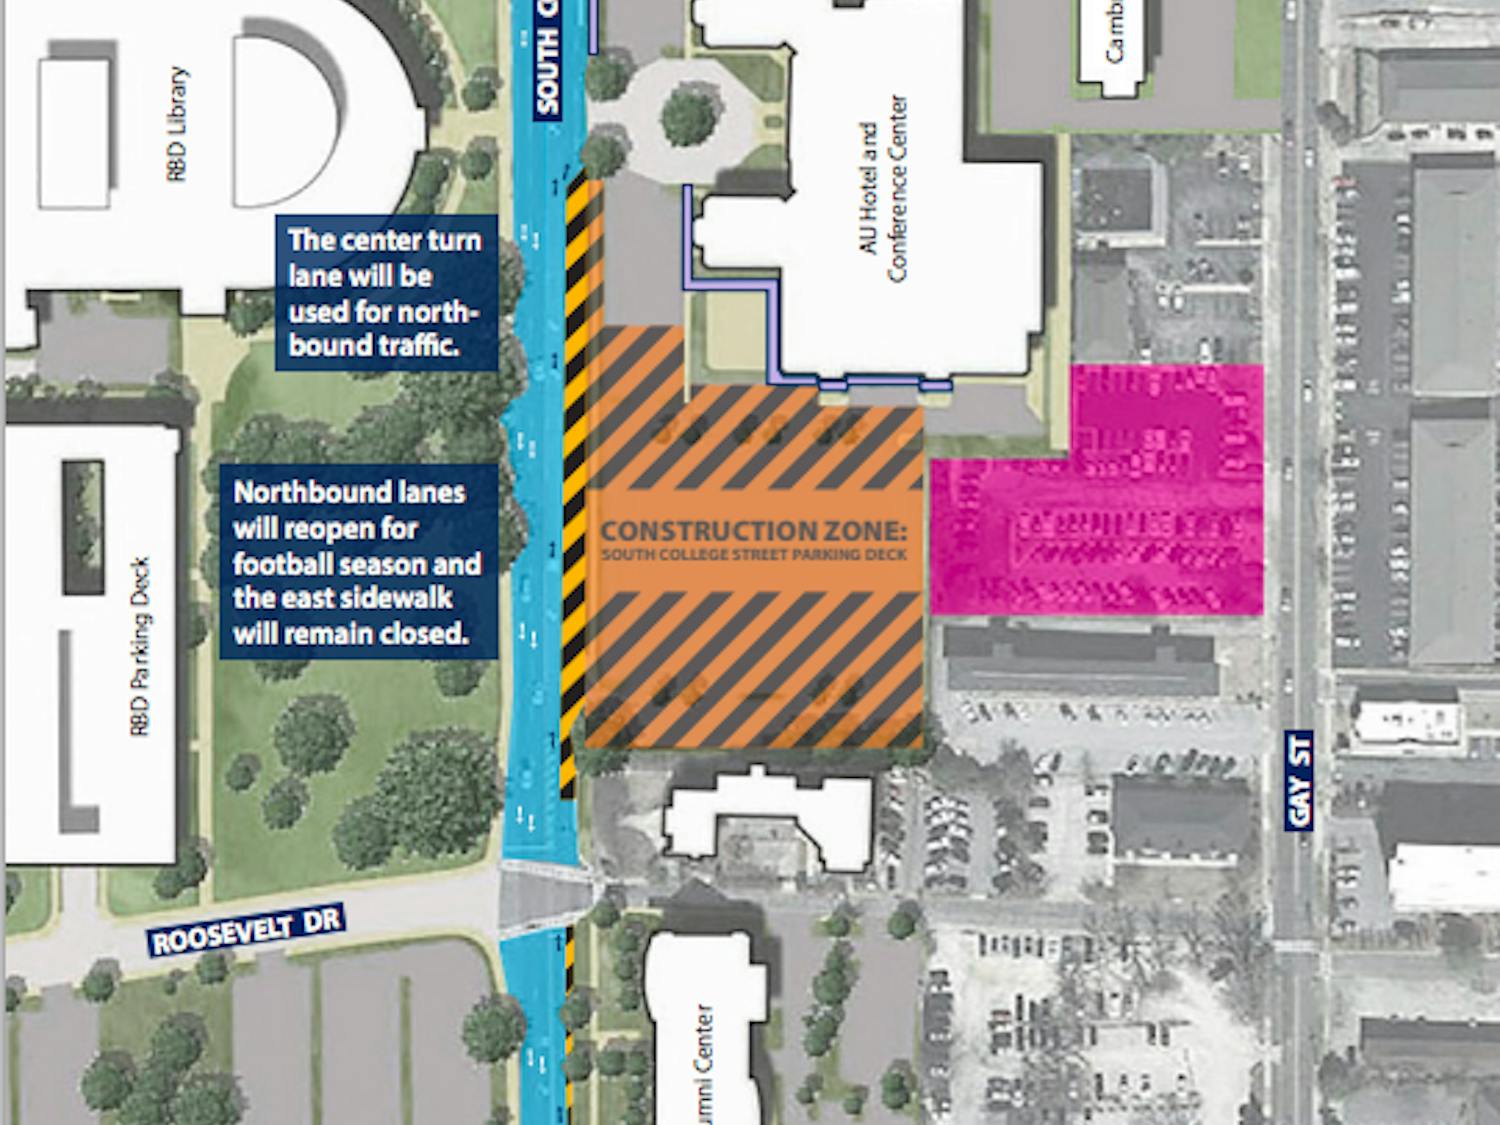 Auburn commuters can expect partial lane closures beginning mid-July as construction of the five story, 600-space South College Street Parking Deck begins on College Street between Roosevelt Drive and the main entrance to The Hotel at Auburn University and Dixon Conference Center.